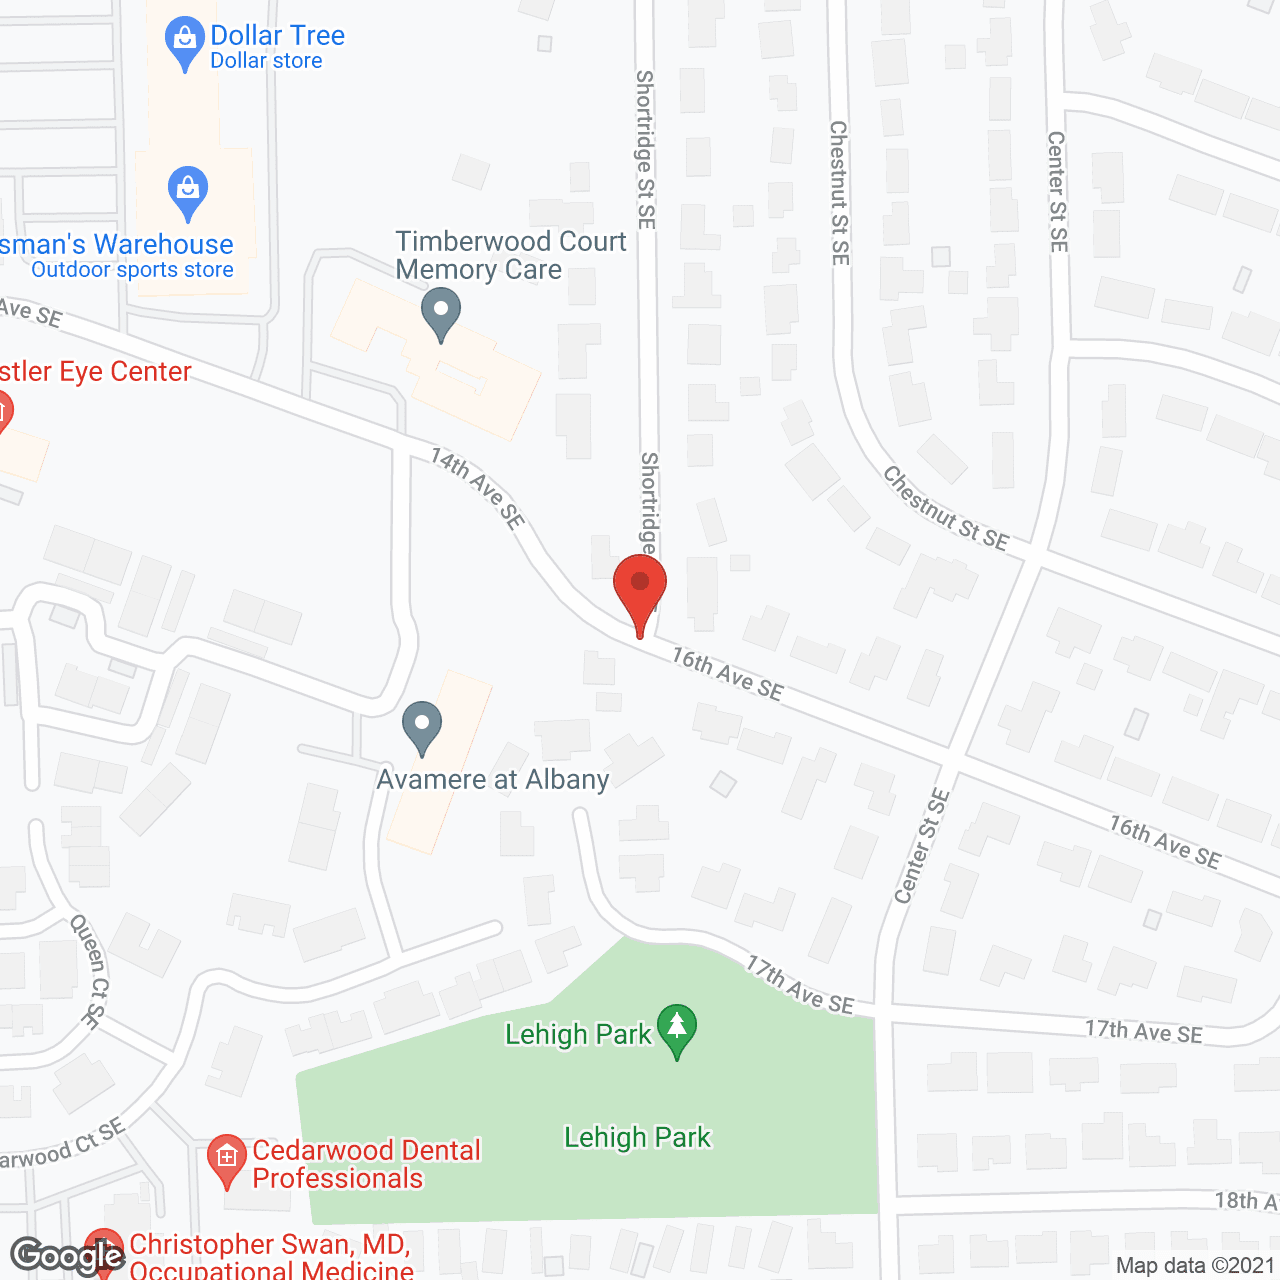 Timberwood Court Memory Care in google map